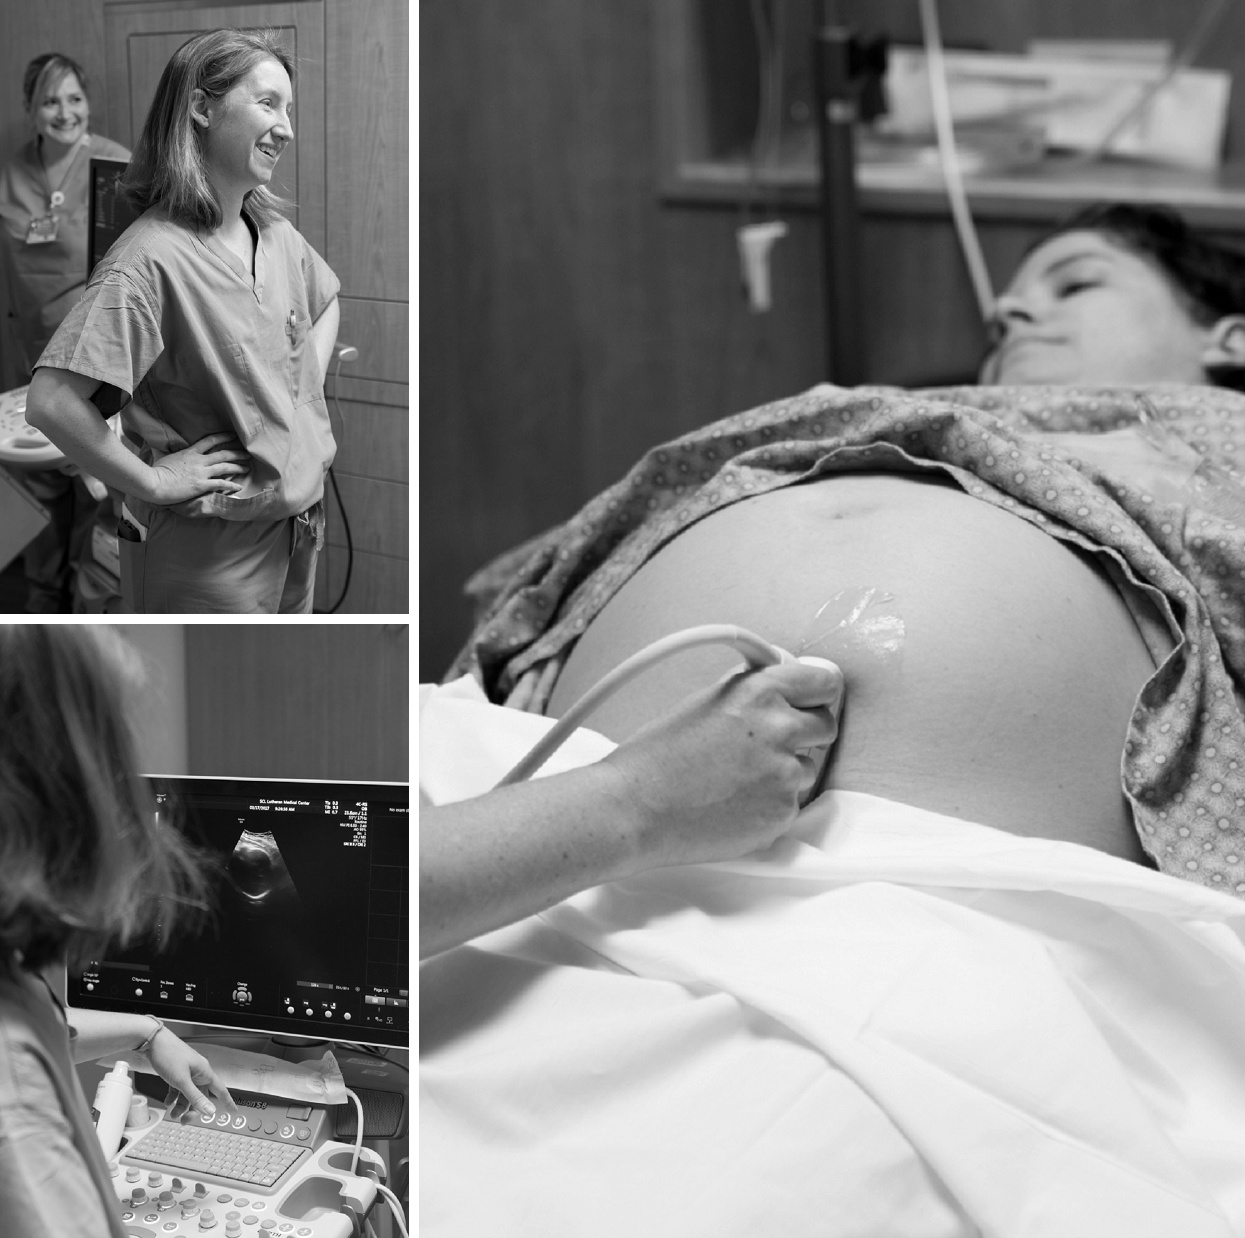 Woman getting an ultrasound, black and white birth photography